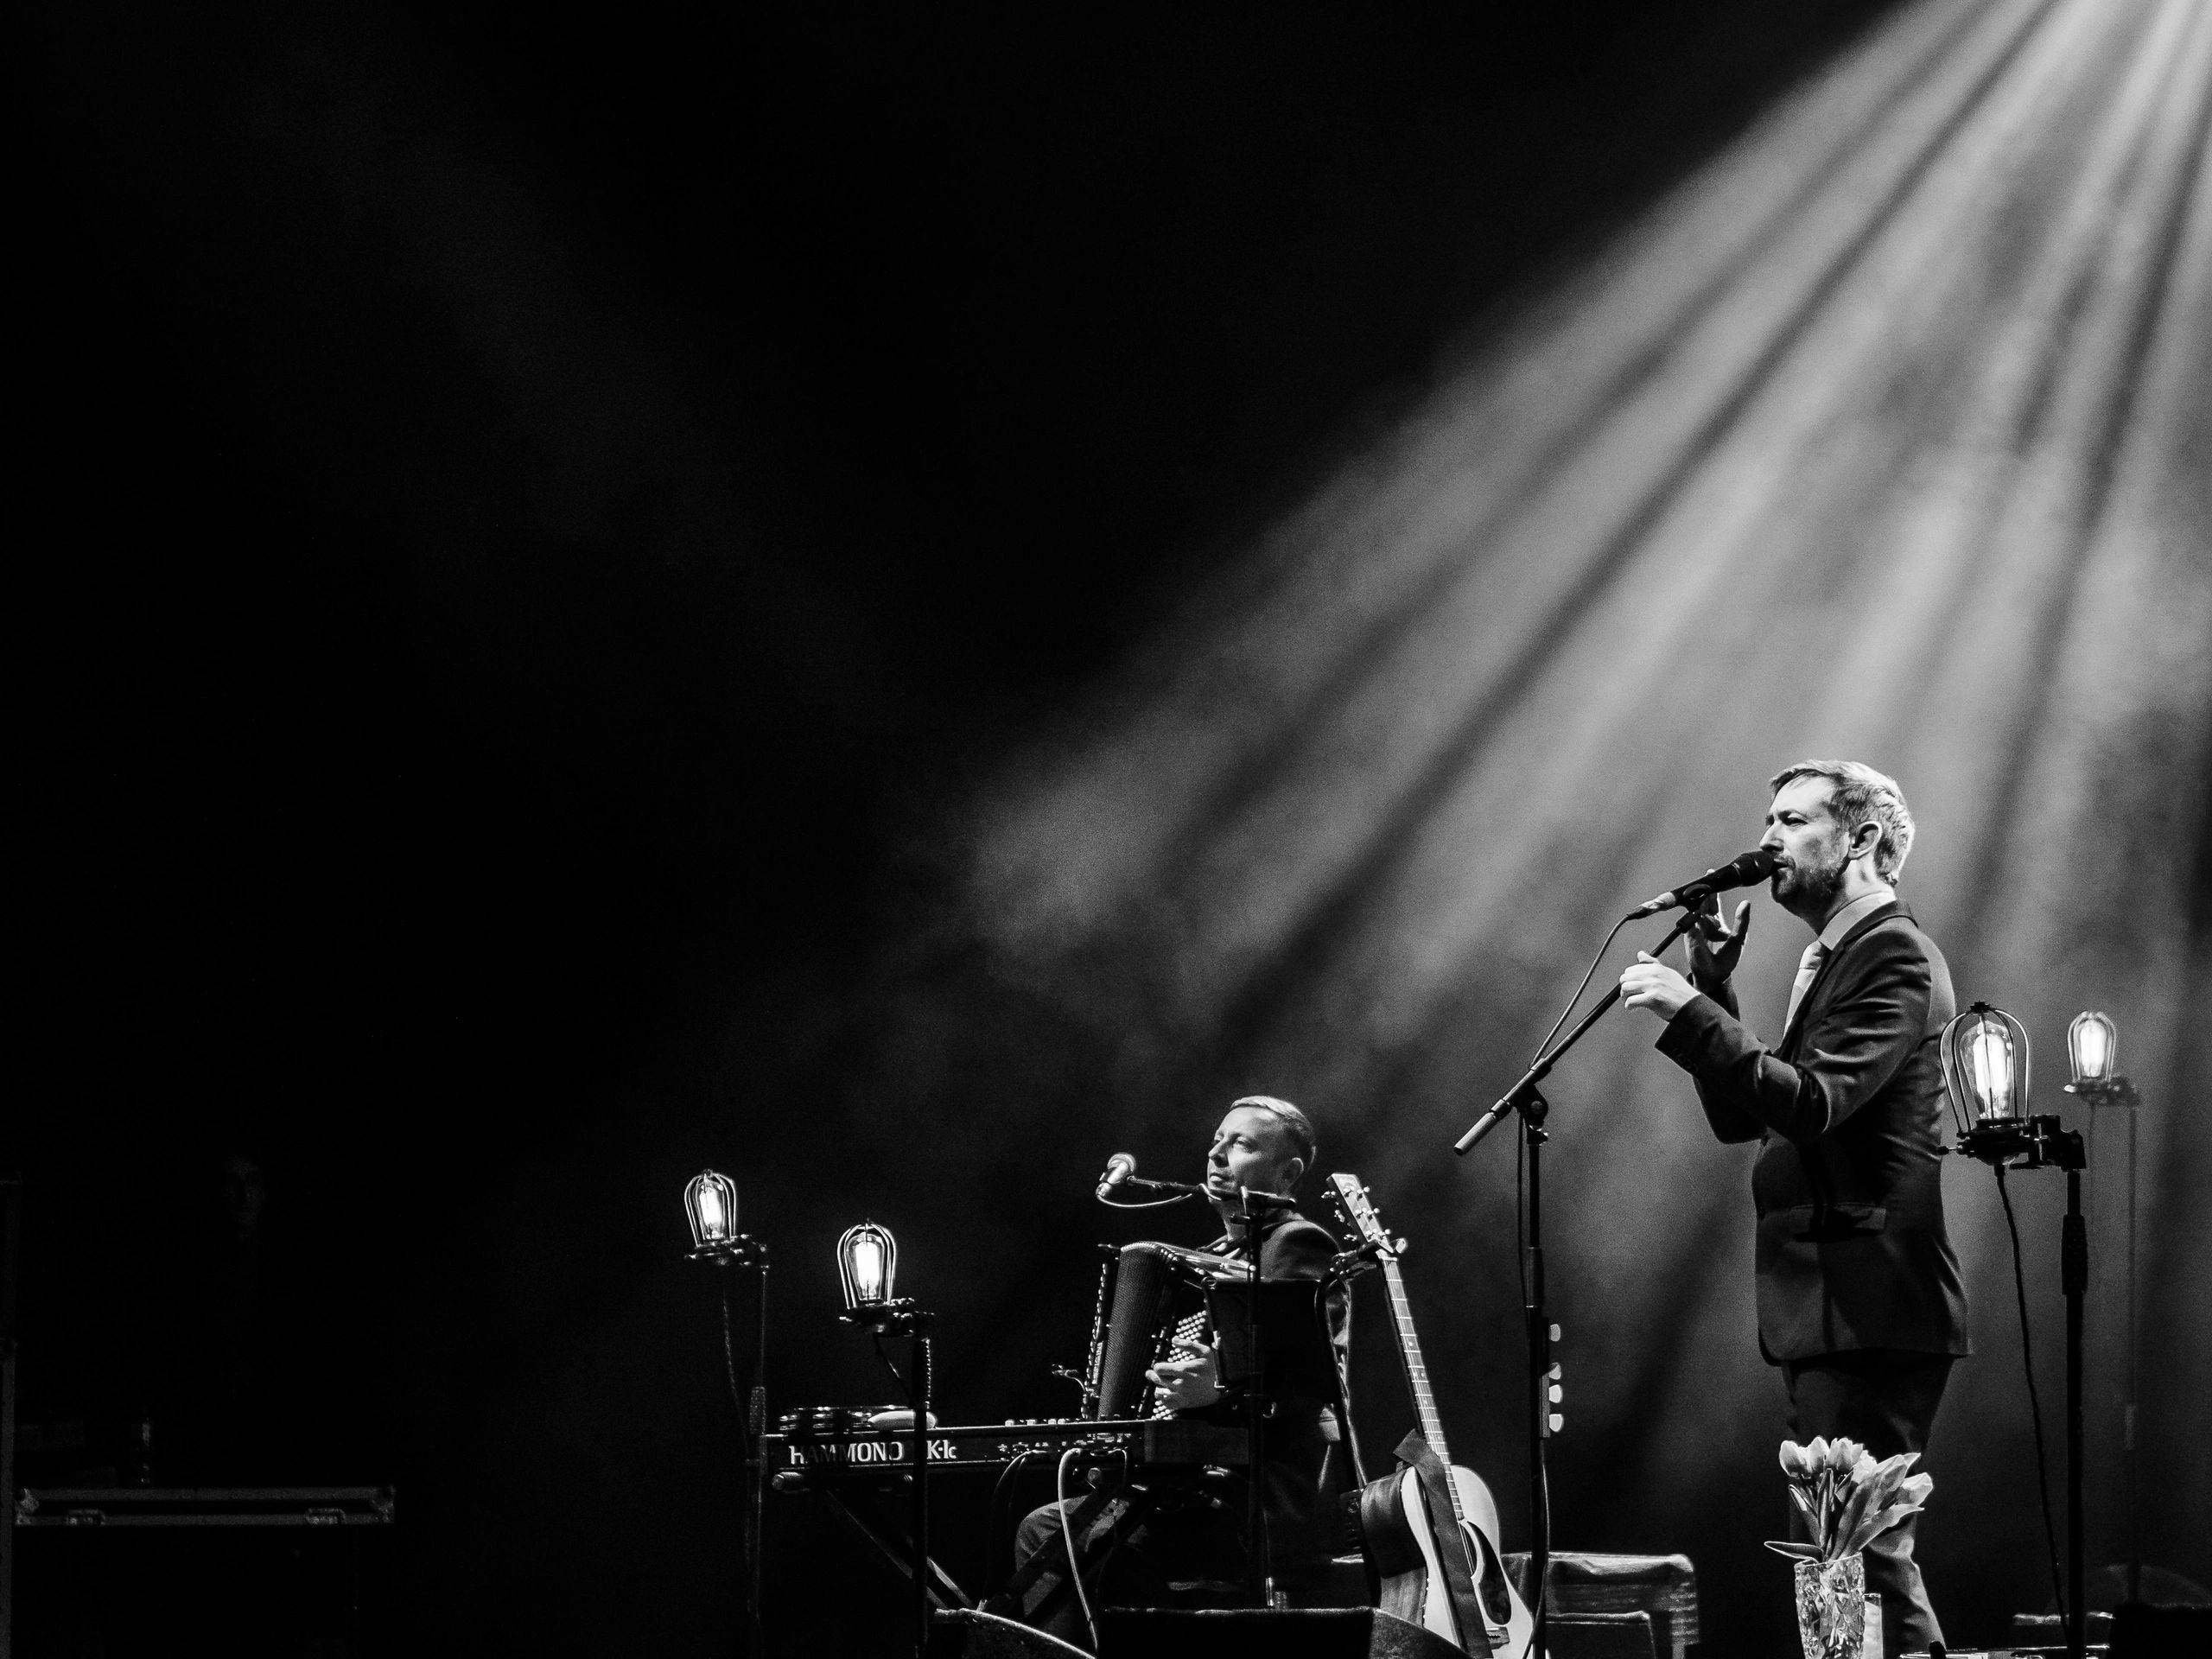 The Divine Comedy, playing Brighton, Dome, Charmed Life Tour